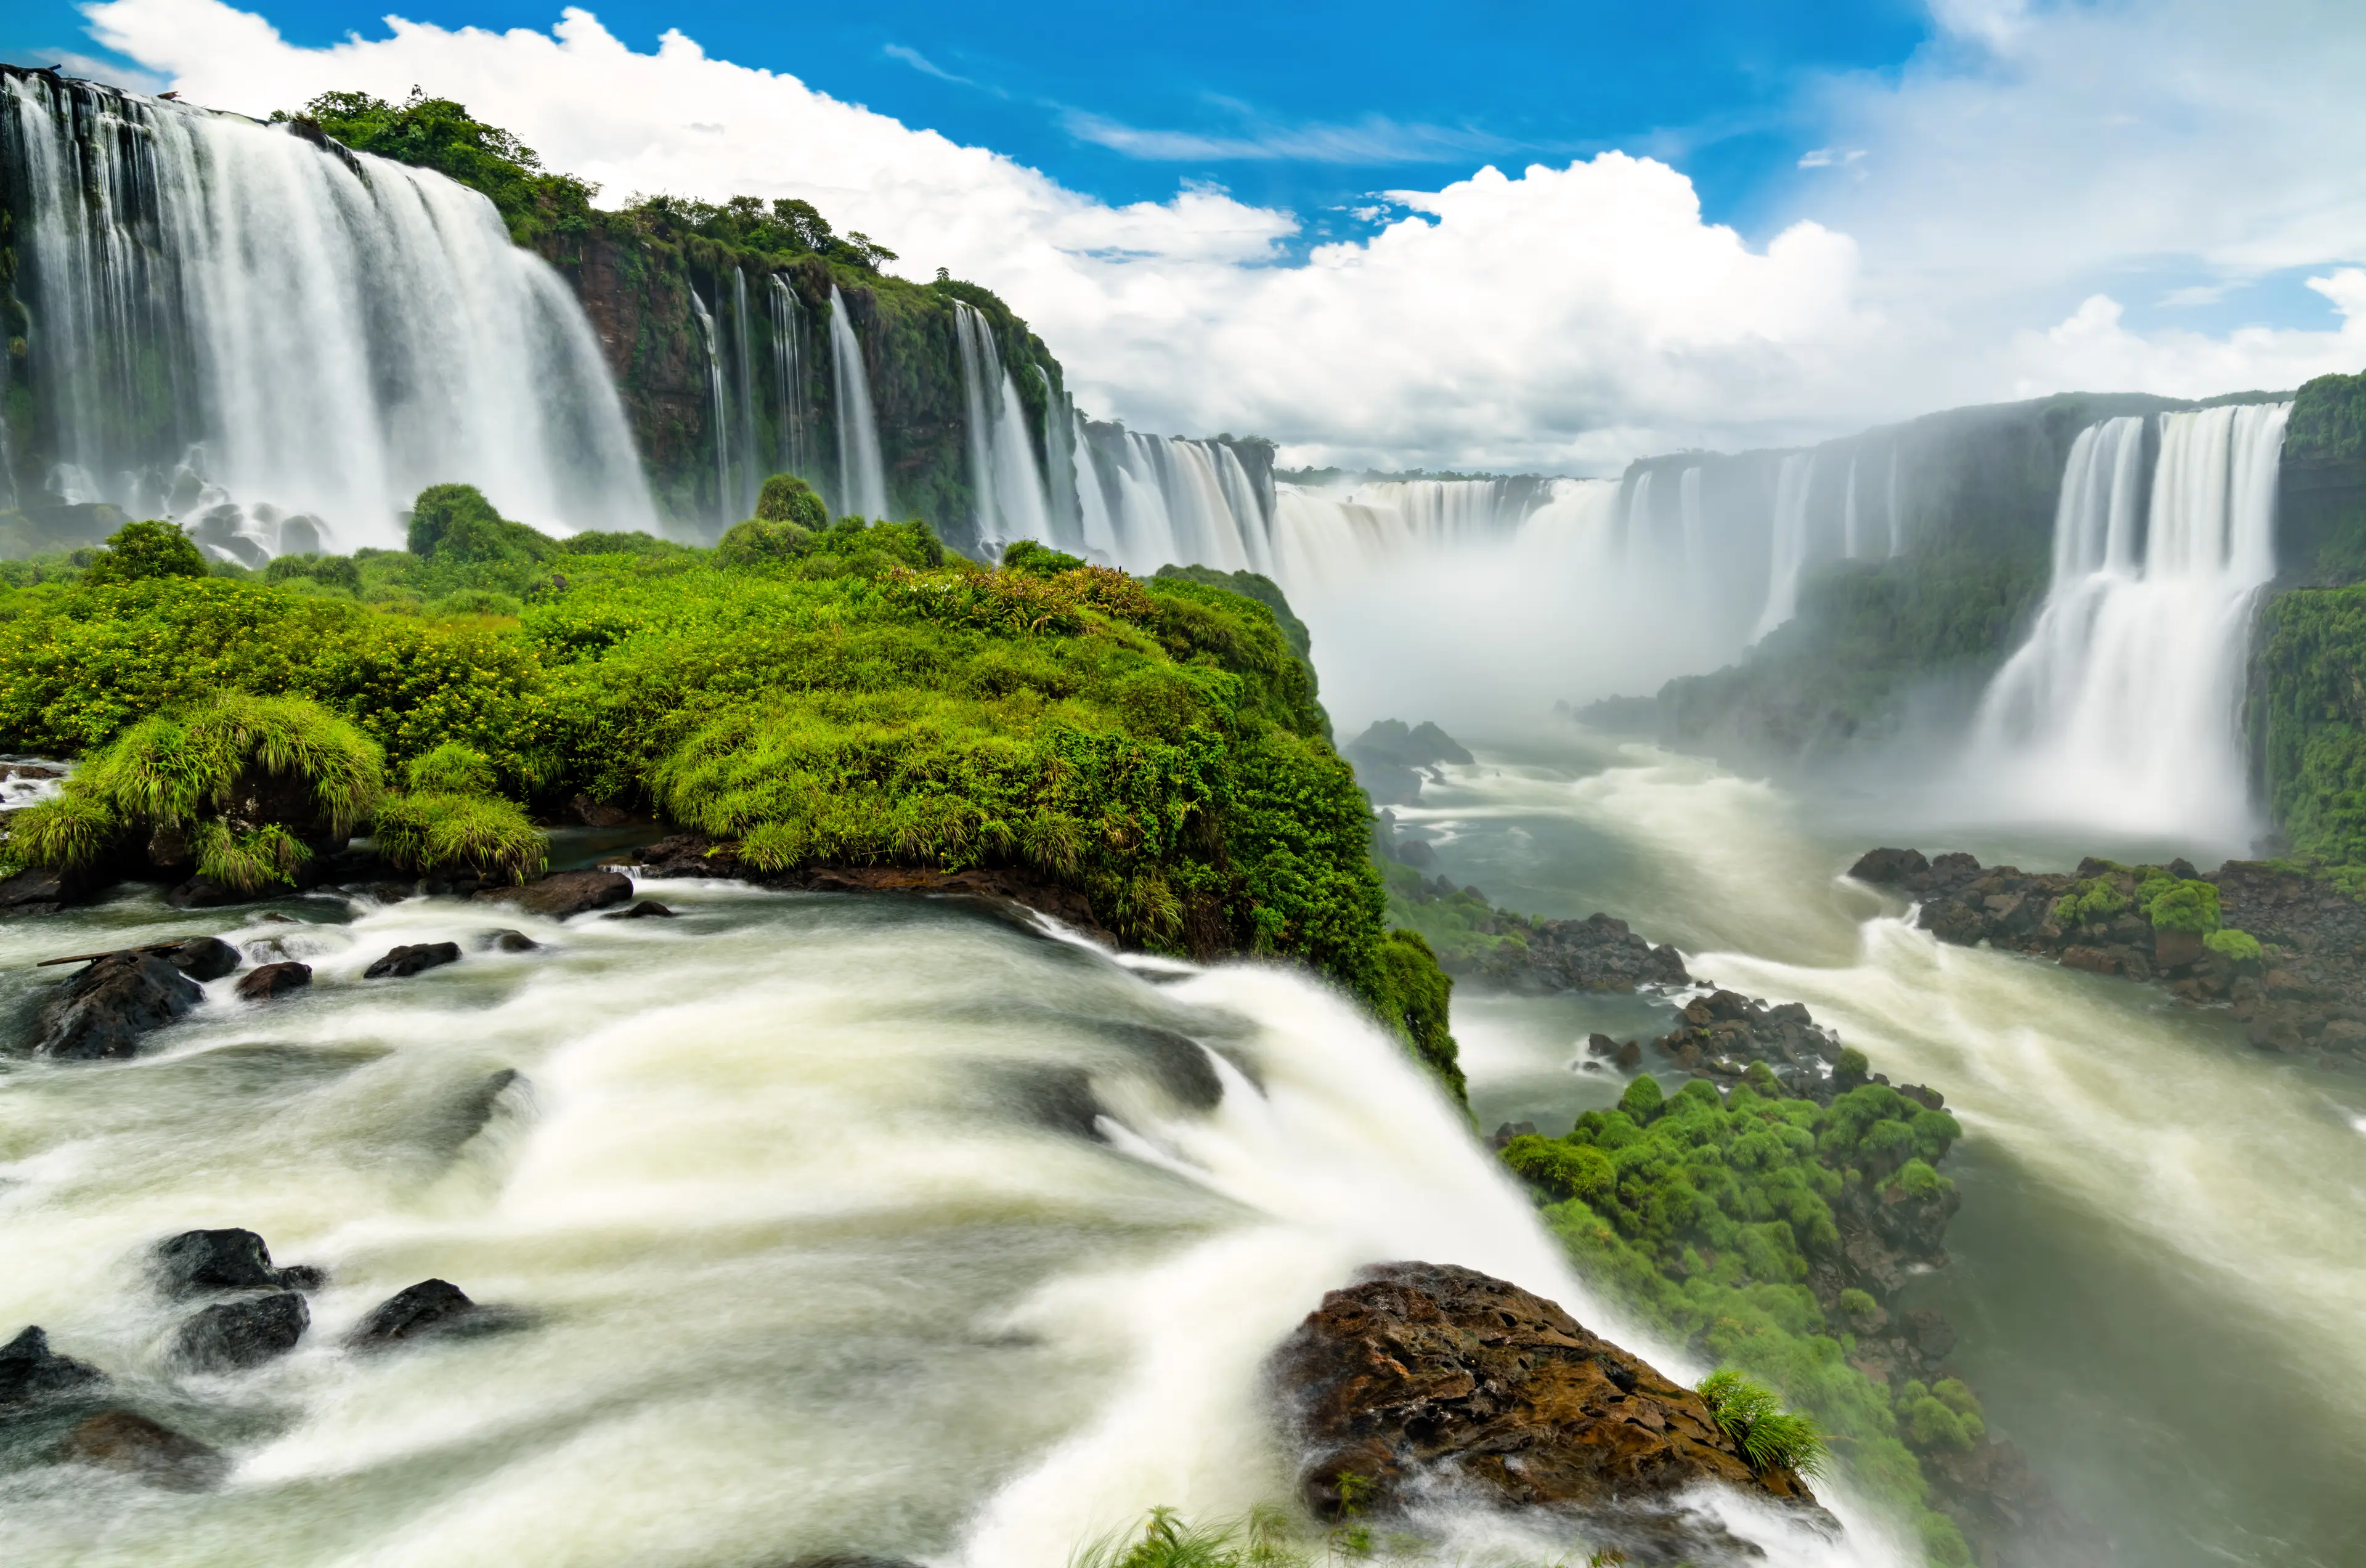 2-Day Relaxing Family Sightseeing Itinerary to Iguazu Falls